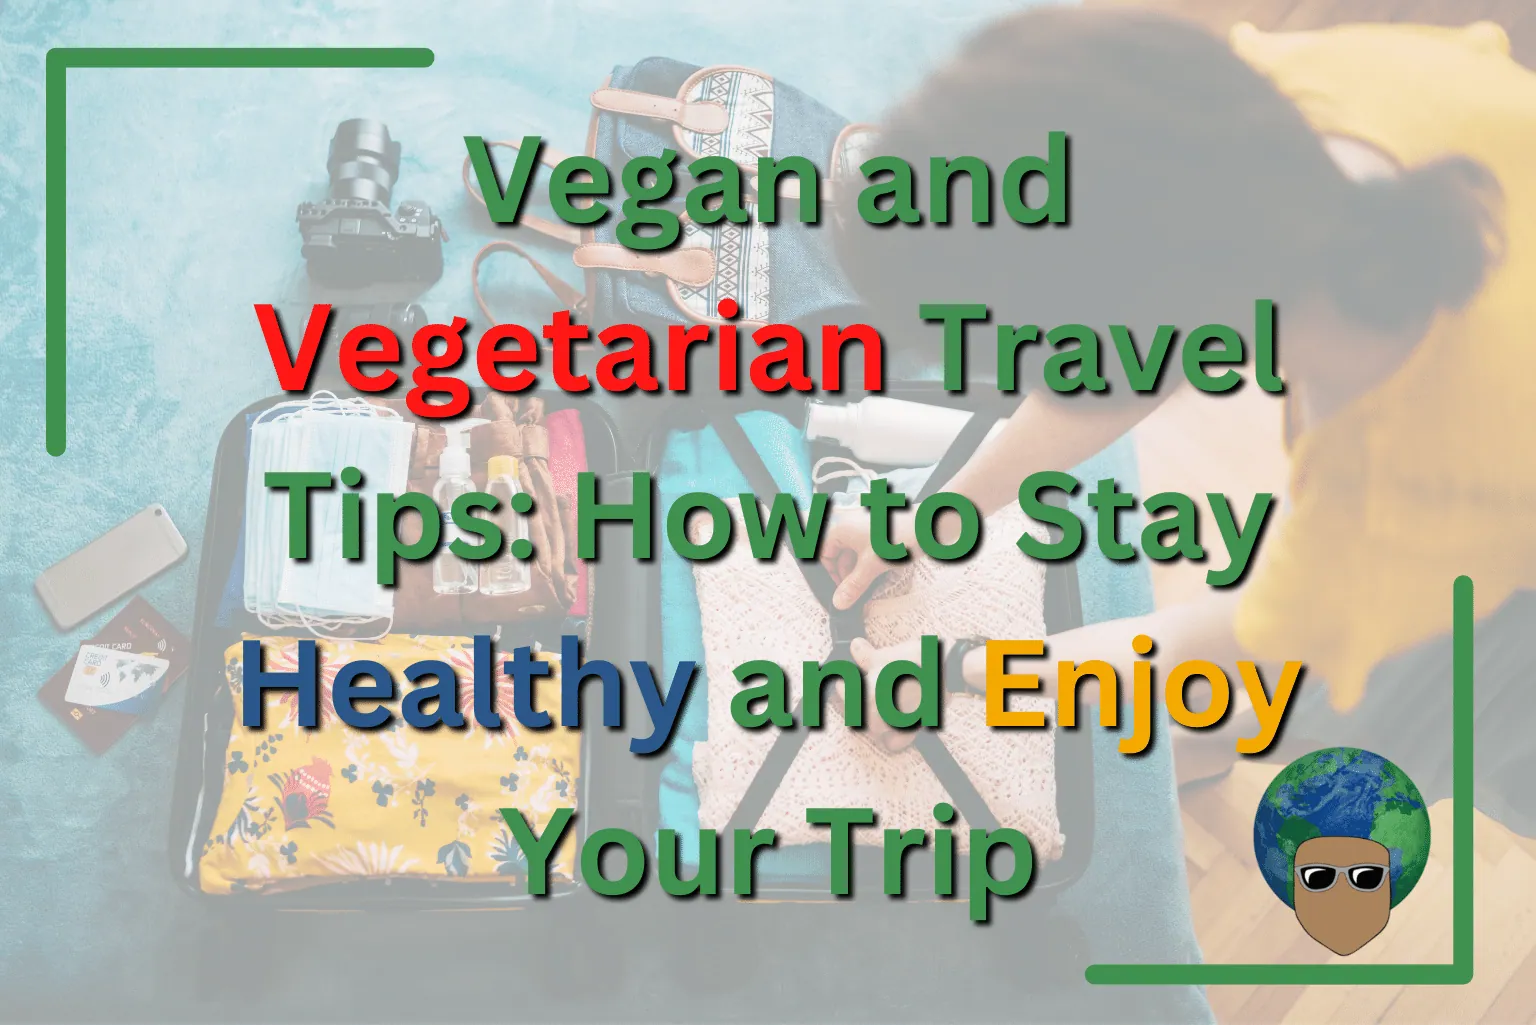 You are currently viewing Vegan and Vegetarian Travel Tips: How to Stay Healthy and Enjoy Your Trip